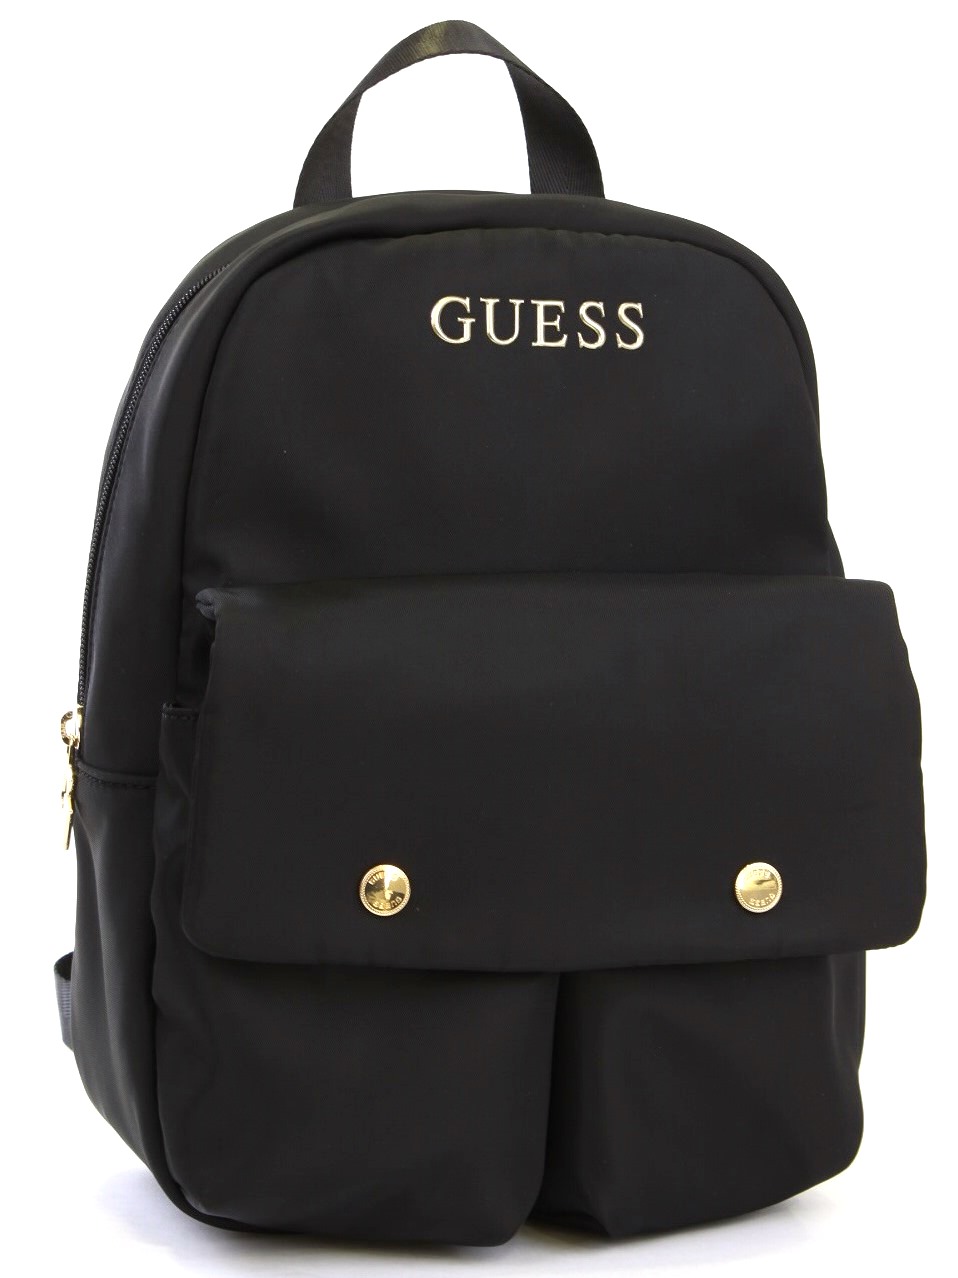 Guess backpack white - 2